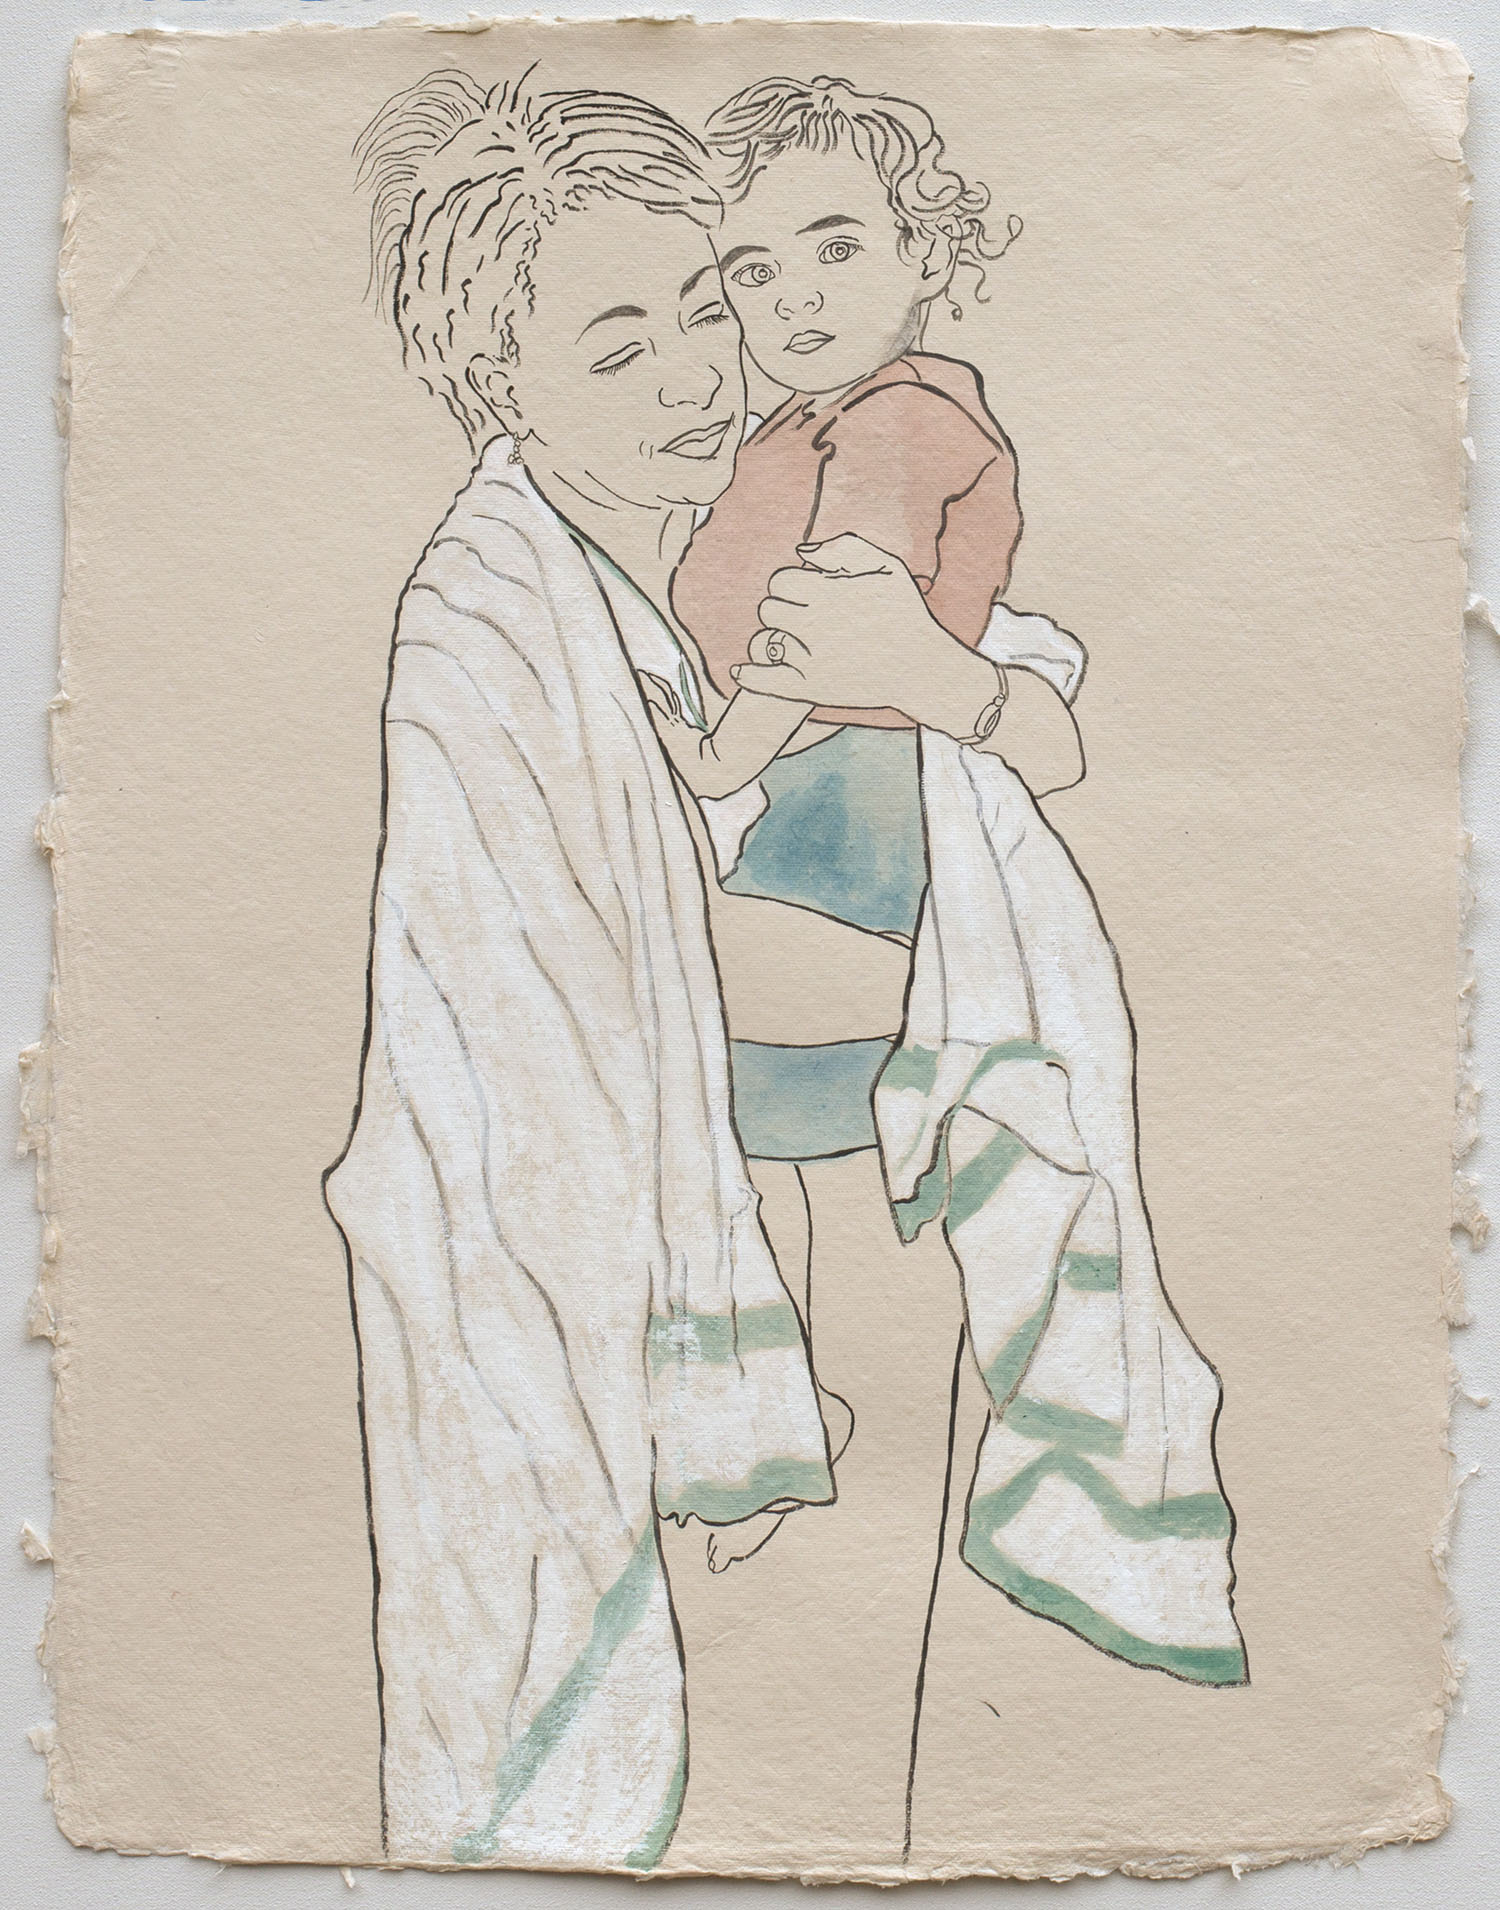   Grandmother and Grandson, Members of the Ethiopian Community in Seattle    2017, ink, watercolor, gouache on handmade paper, 25x19.”   Port of Seattle purchase for the Nursing Suite in SeaTac Airport. 